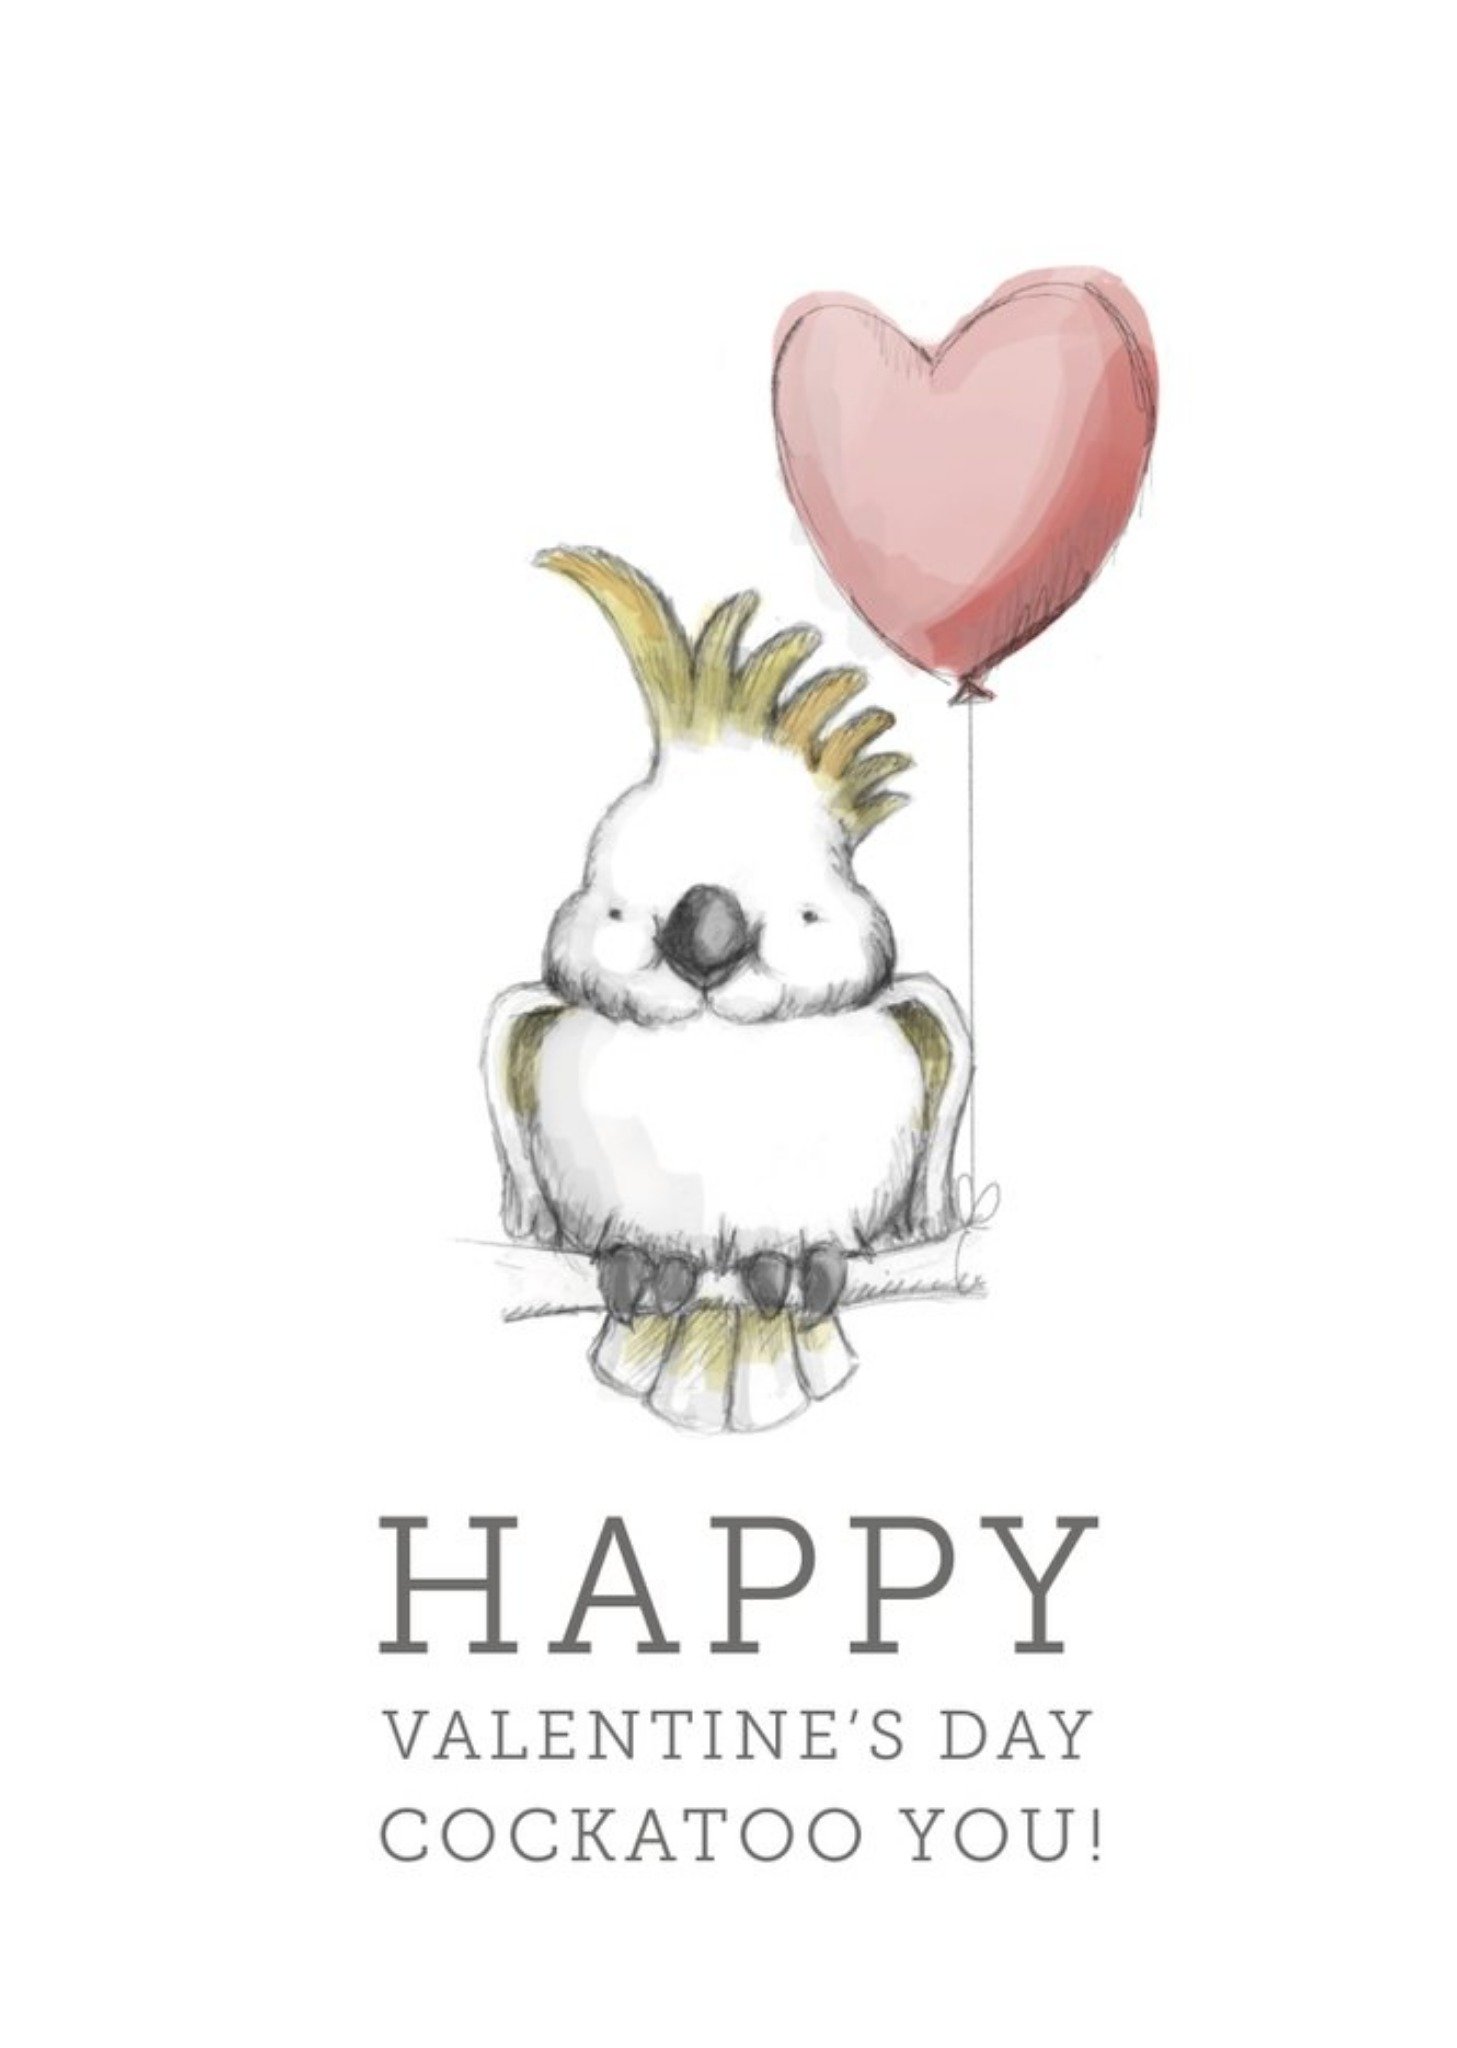 Moonpig Illustration Of A Cockatoo With A Heart Shaped Balloon Valentine's Day Card, Large